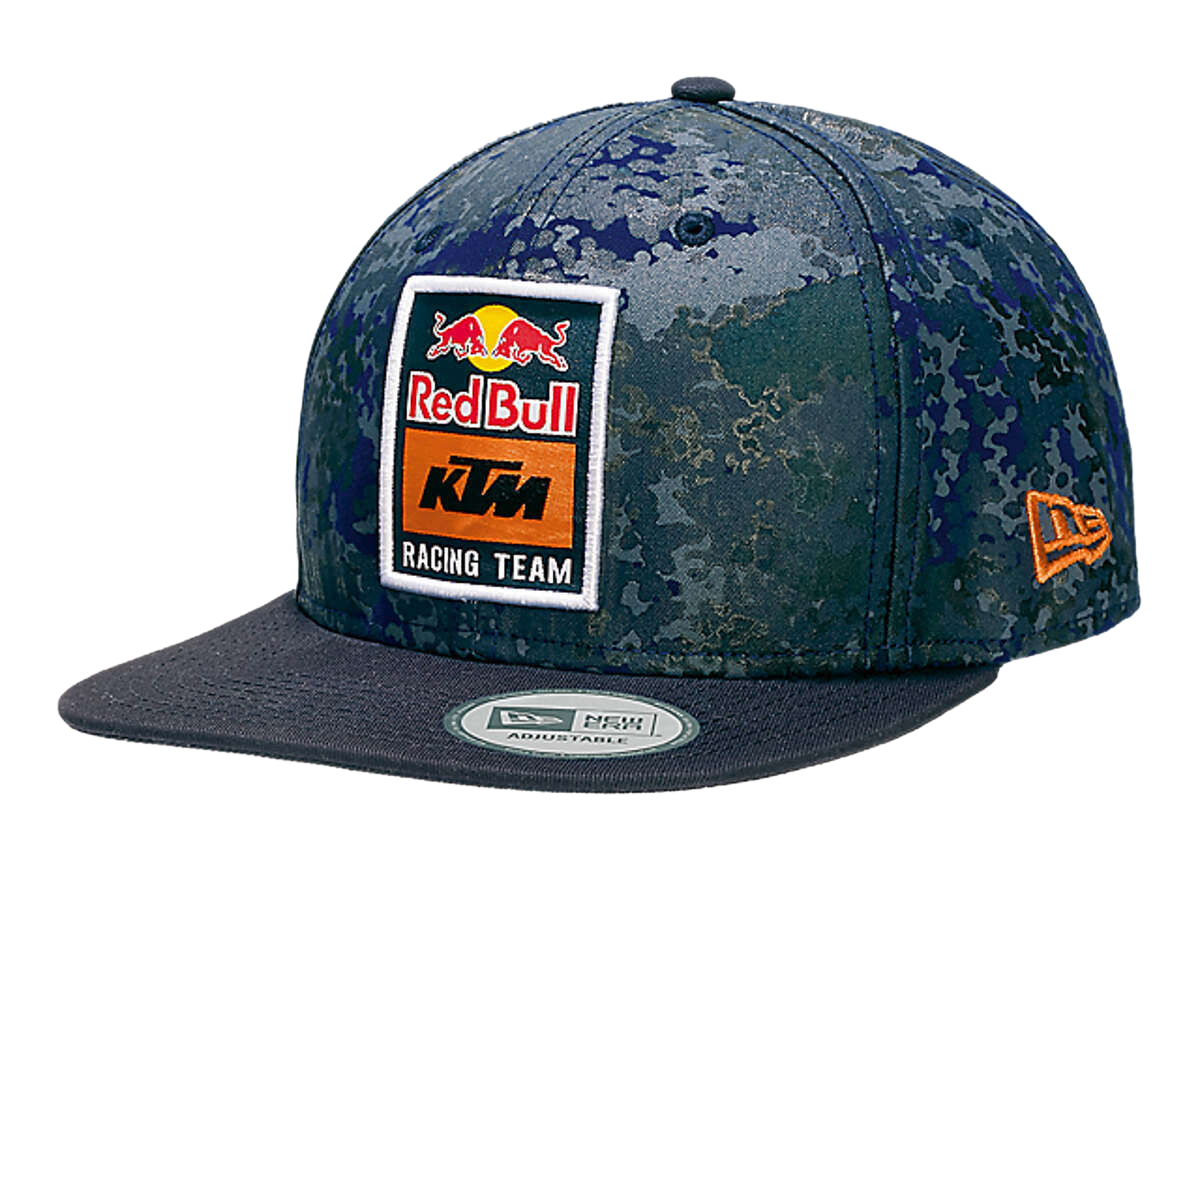 Red Bull Casquette Snap Back KTM Racing Team Camo - Navy Camouflage